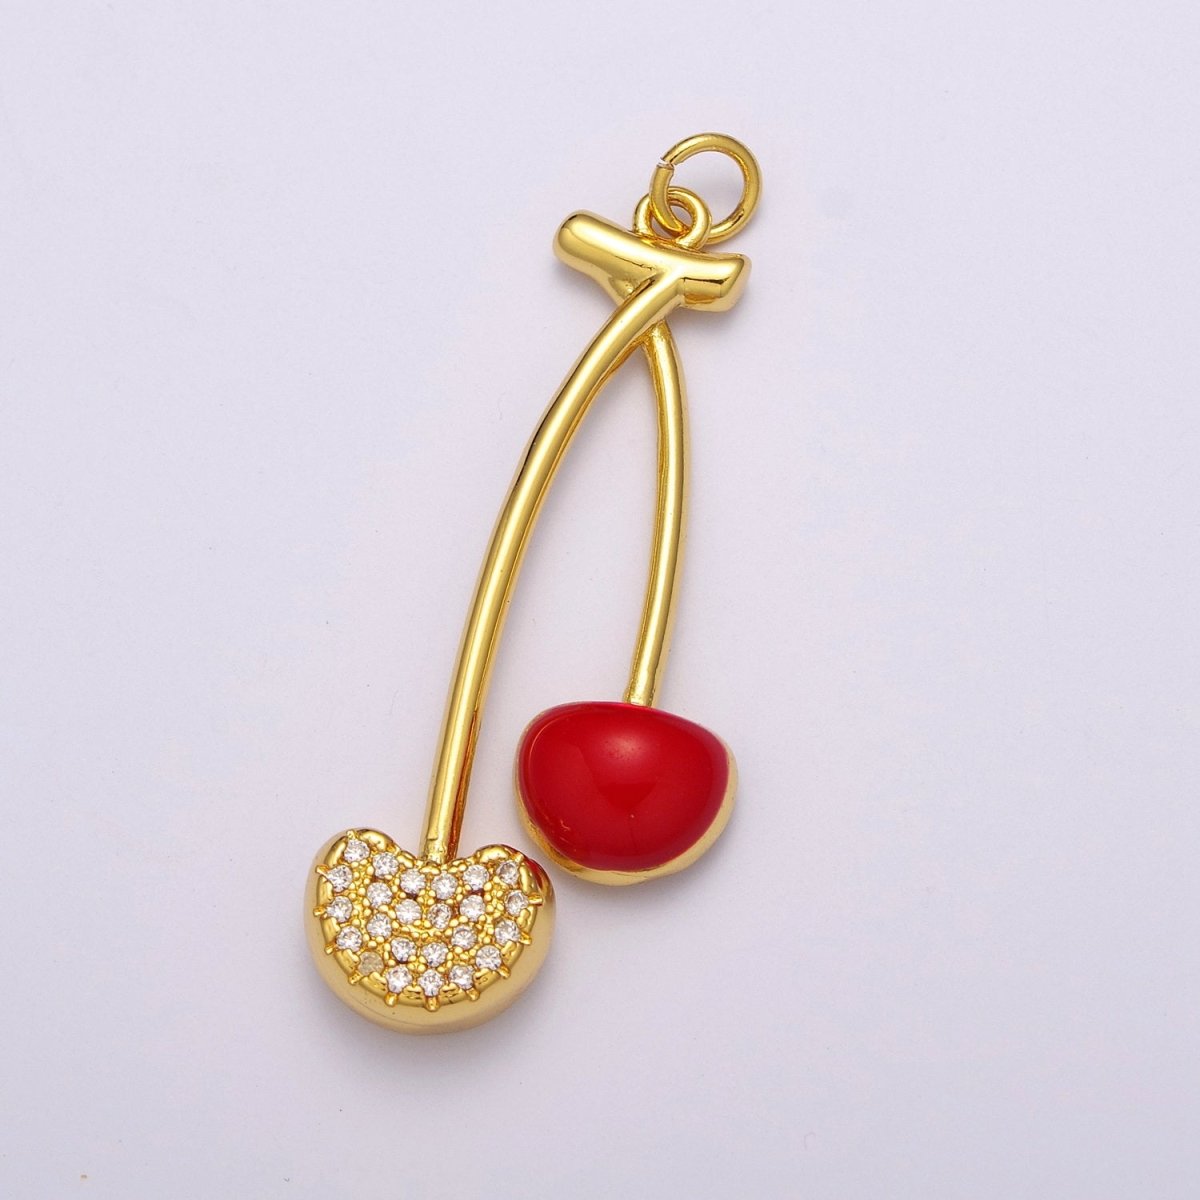 Dainty Cherry Charm Dangle Fruit Charm for Necklace Earring Component Supply M-755 - DLUXCA